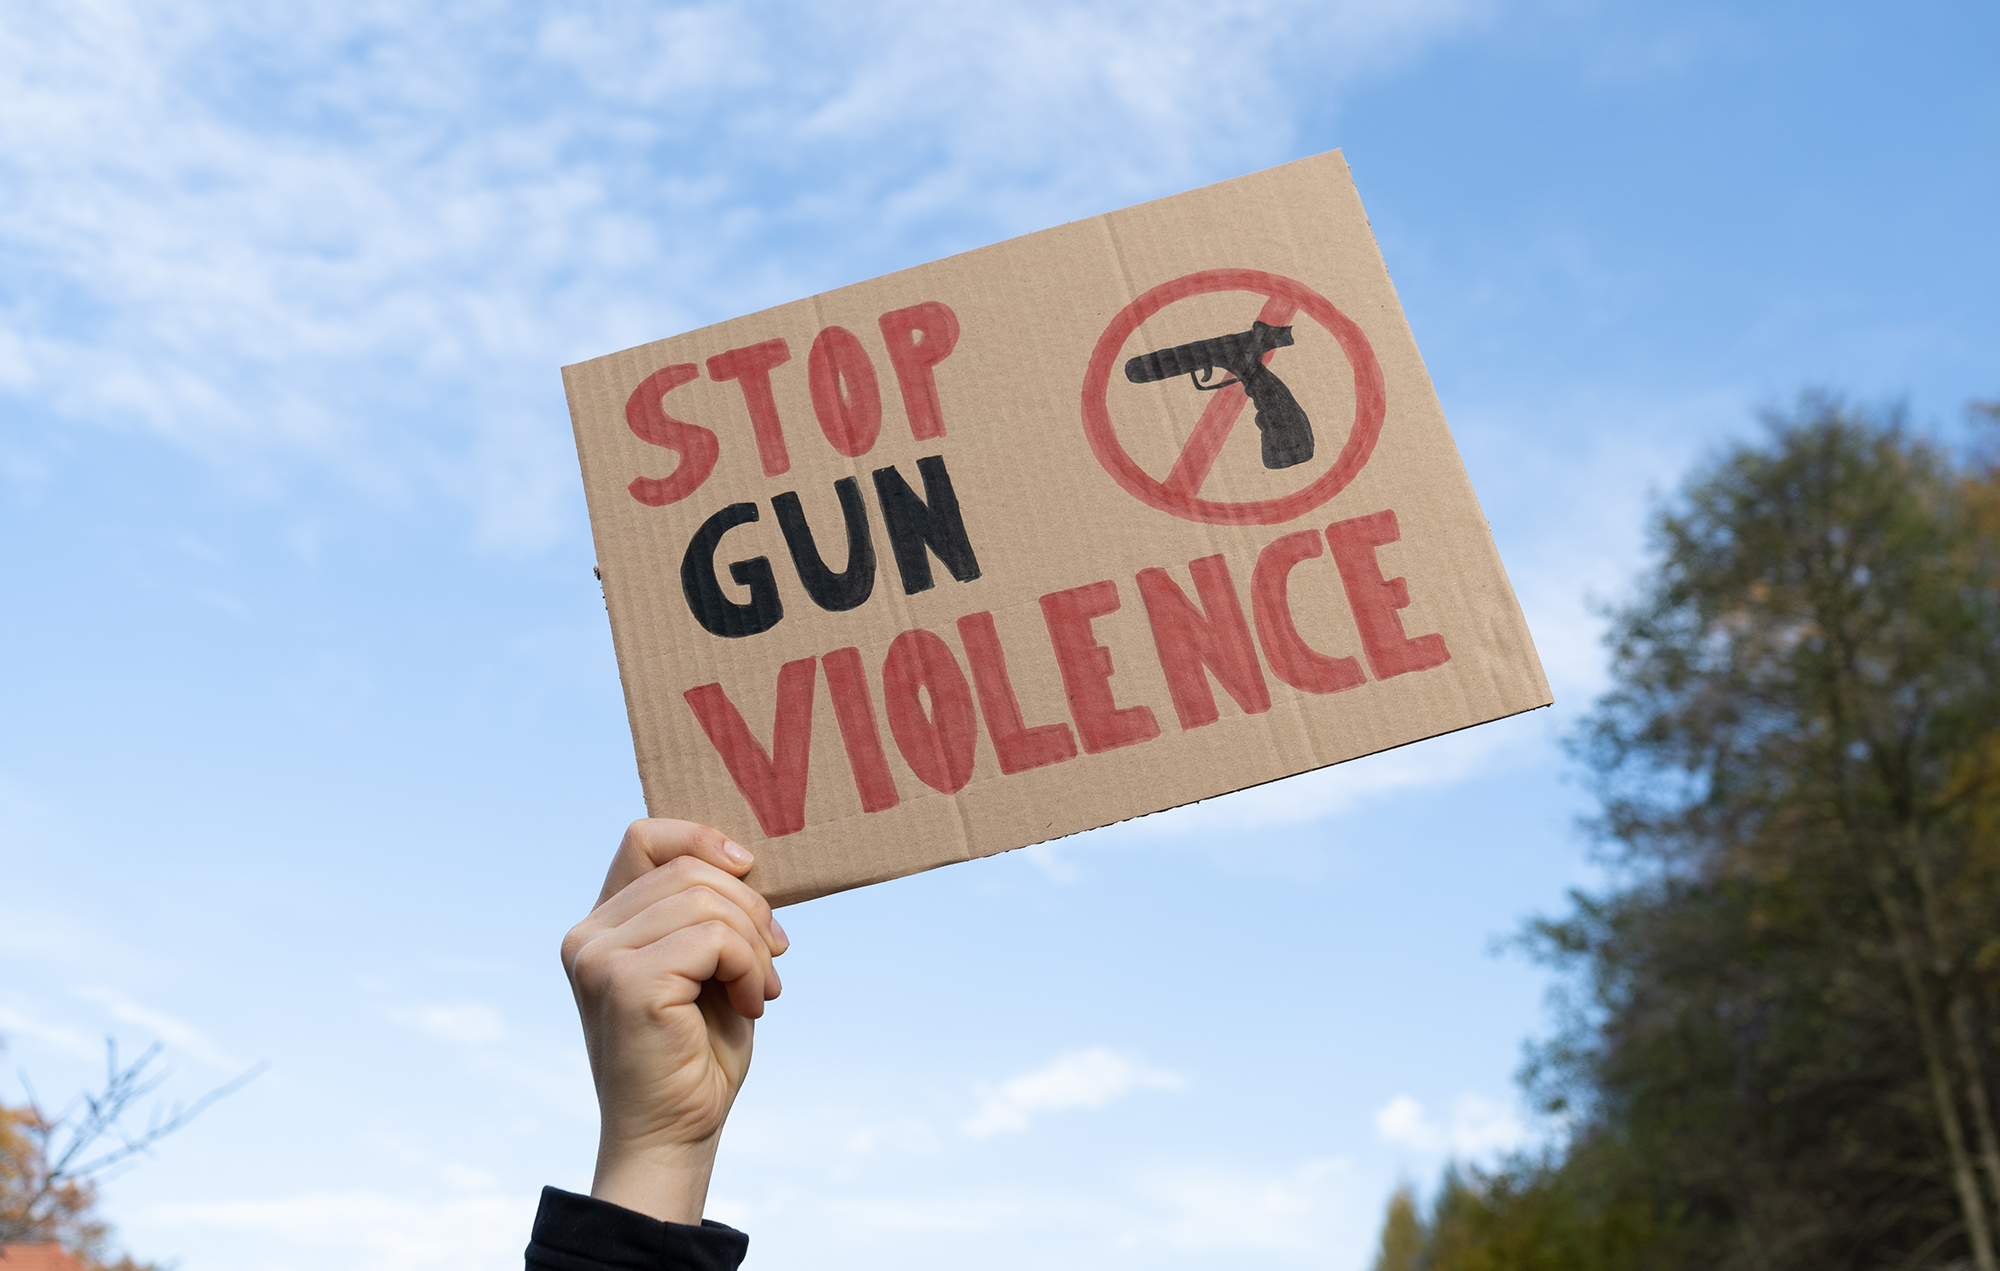 As local governments look for solutions to gun violence